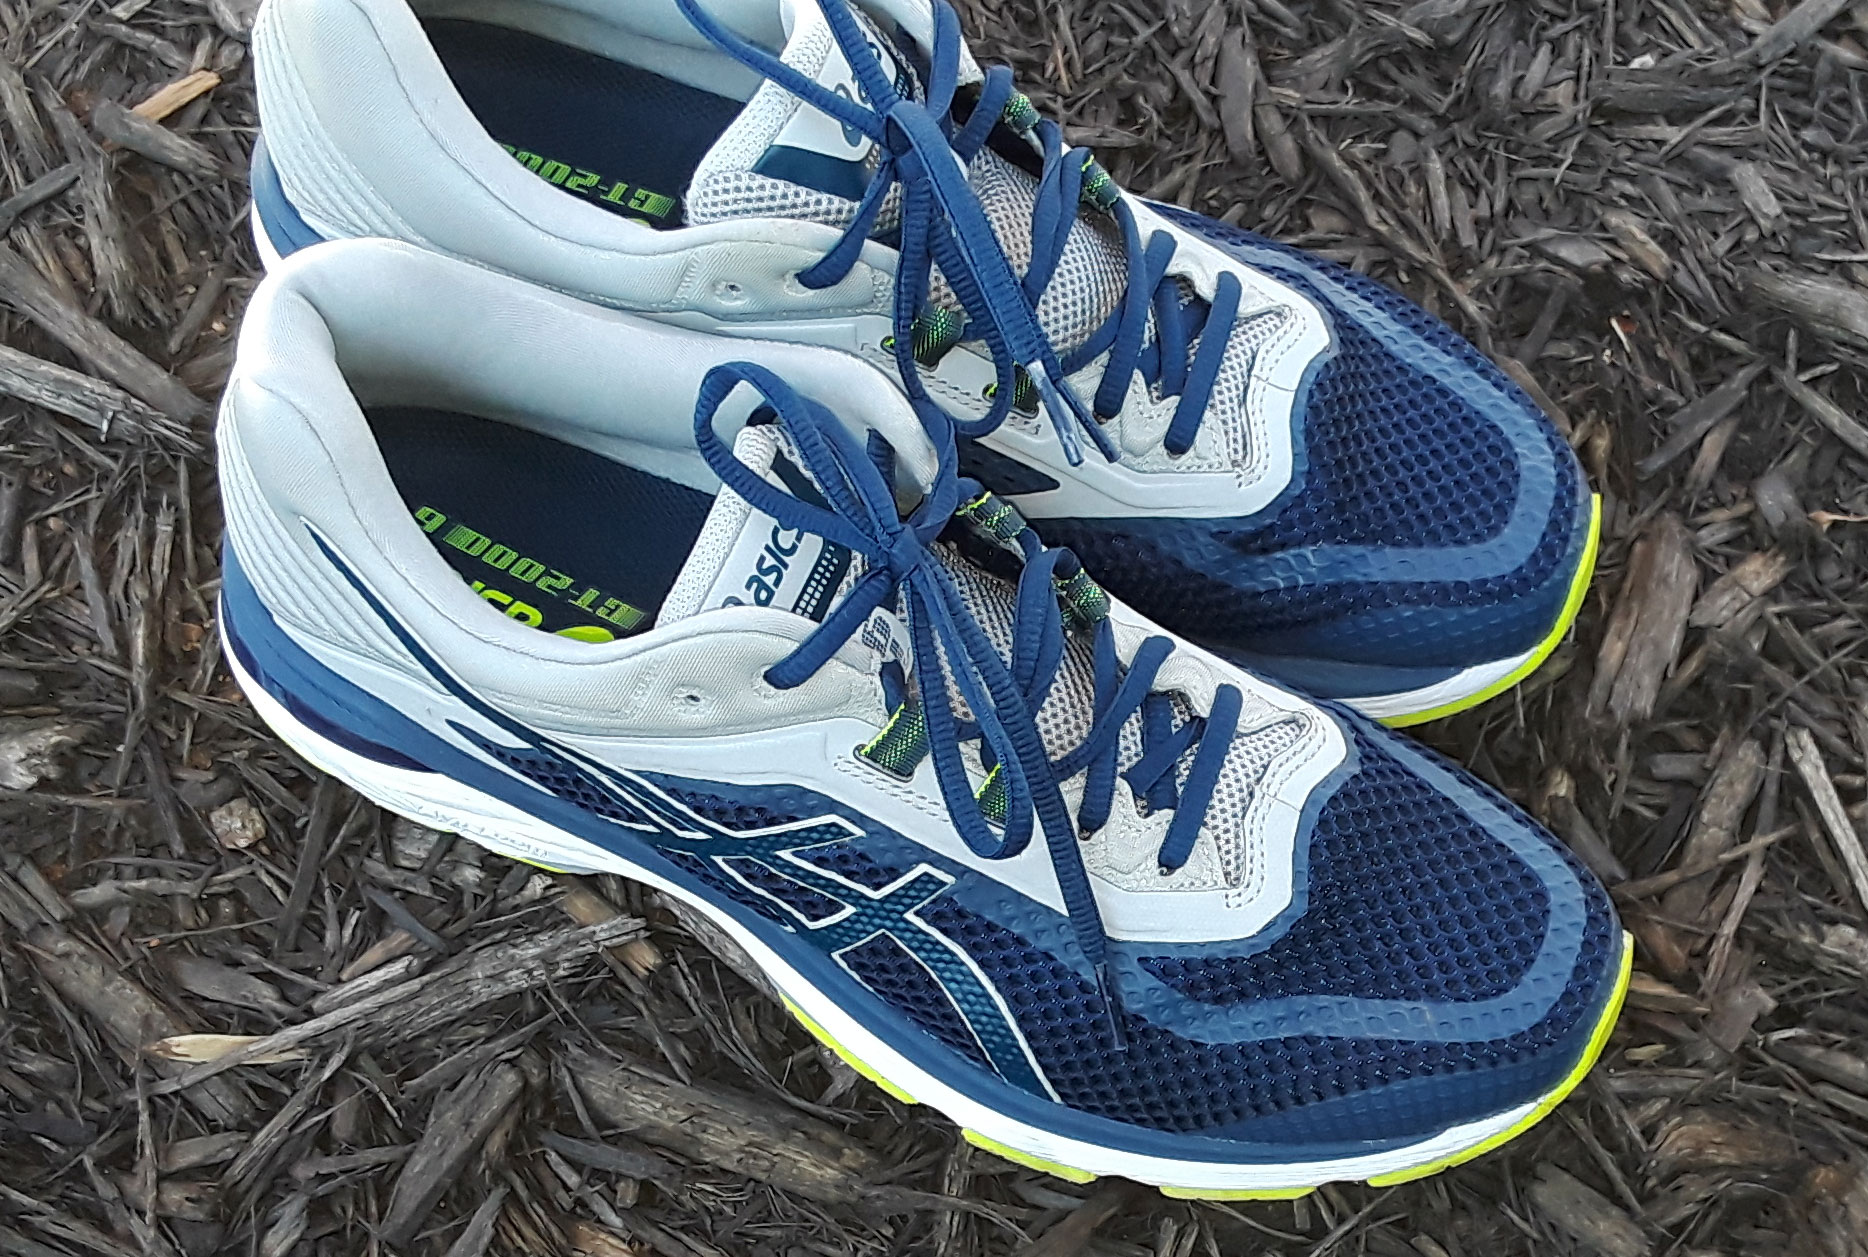 Asics GT 2000 6 Review » Believe in the Run